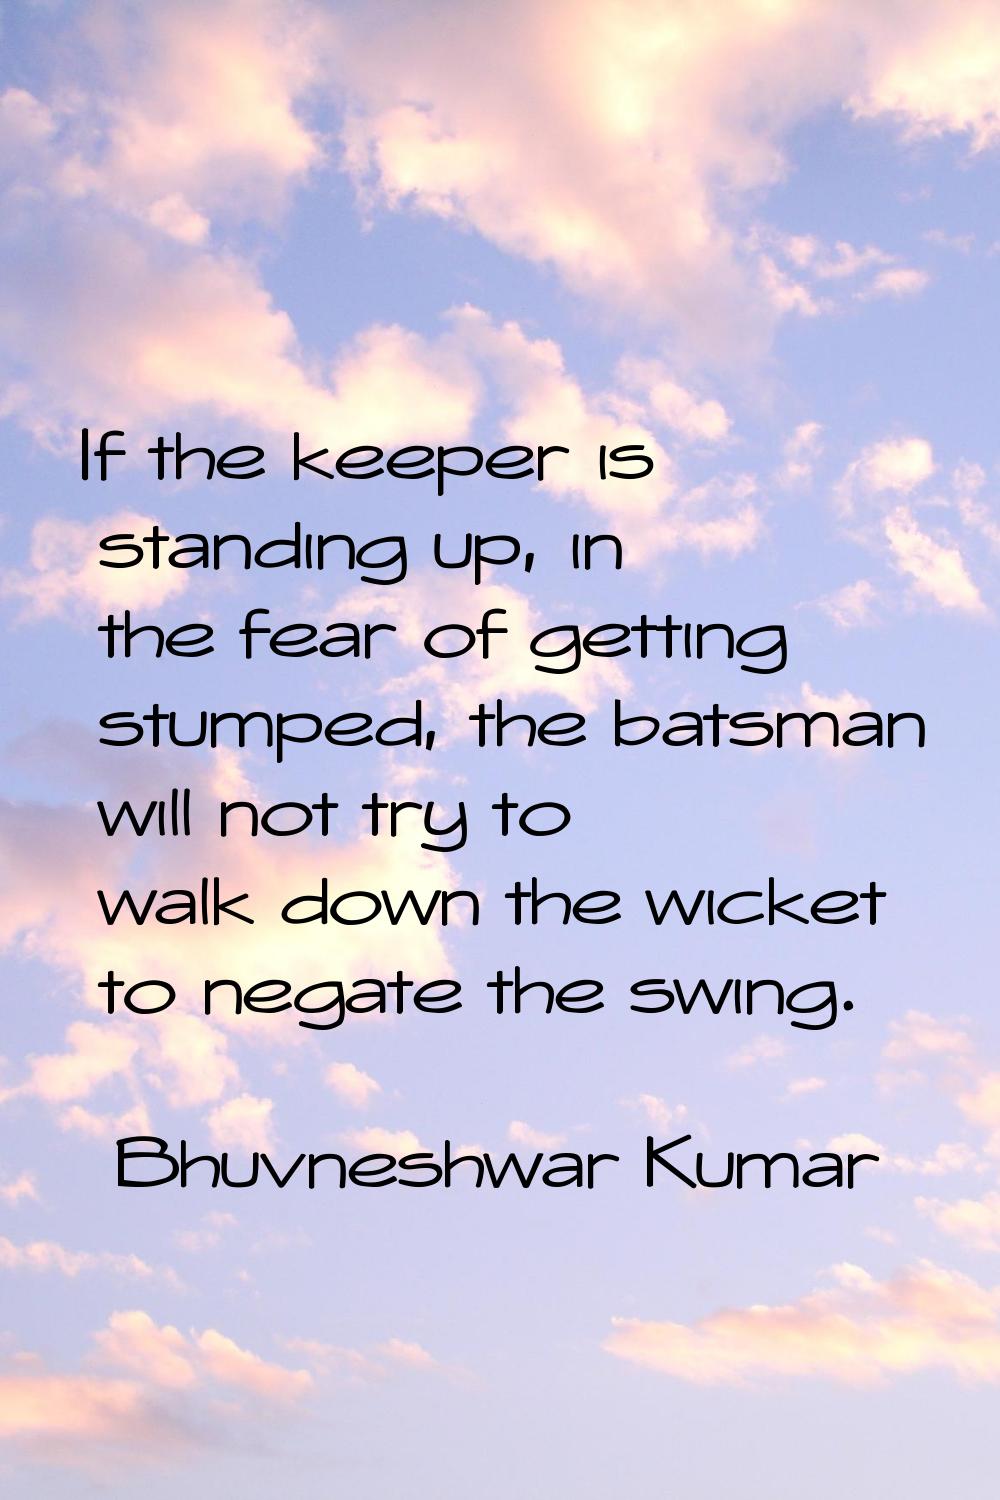 If the keeper is standing up, in the fear of getting stumped, the batsman will not try to walk down